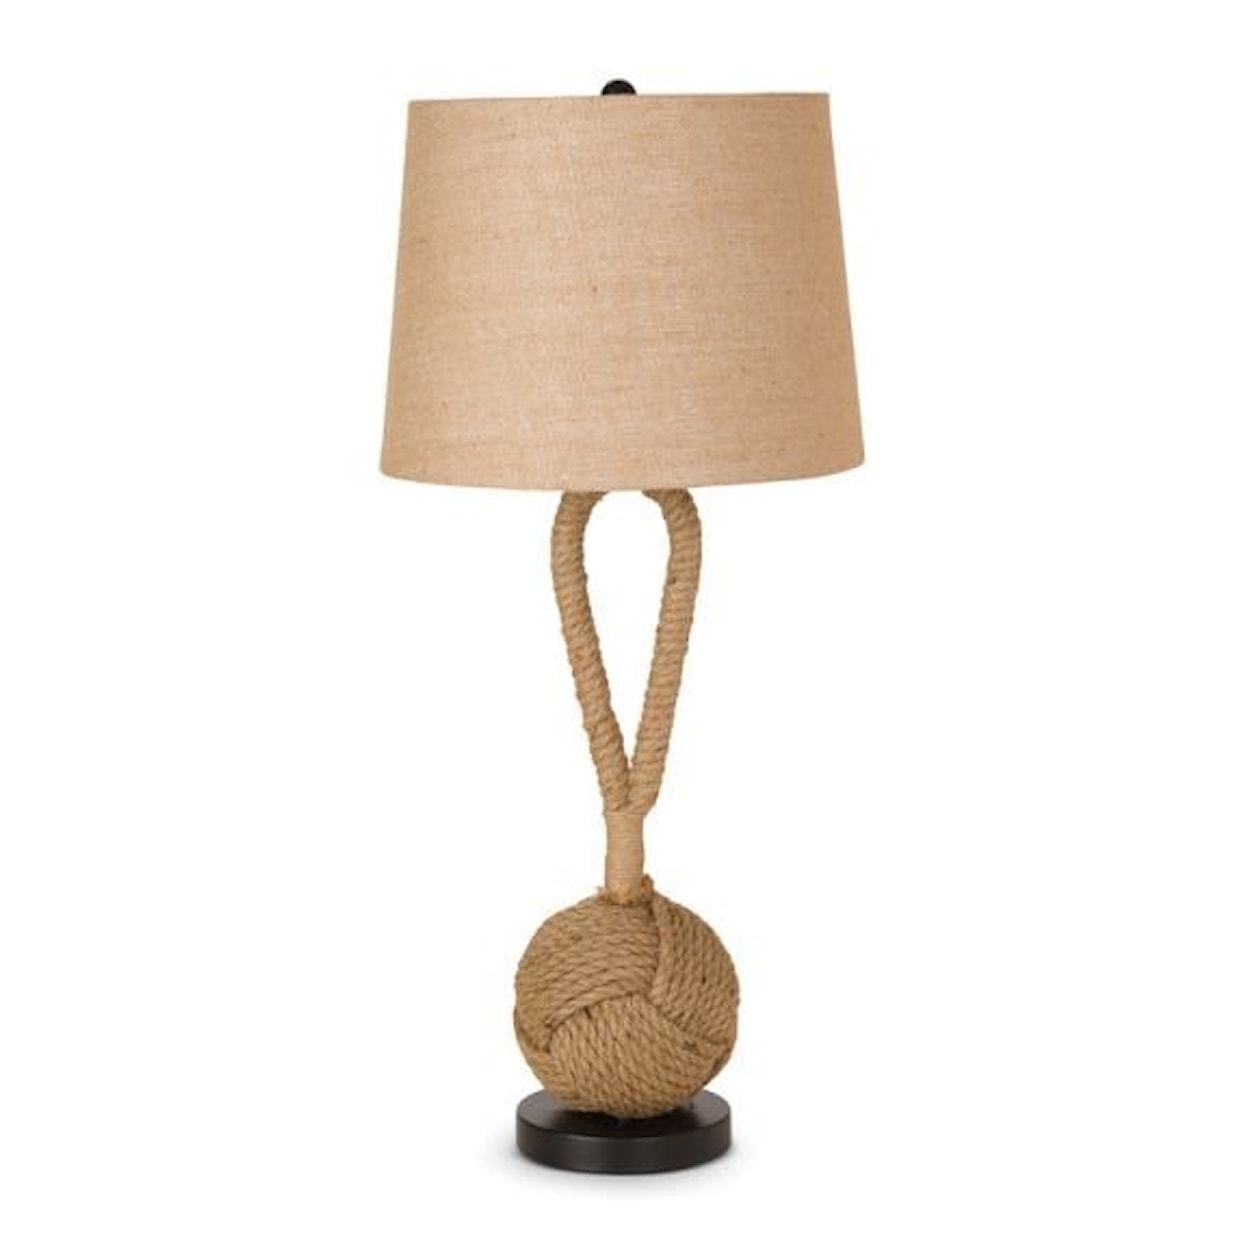 Lux Lighting Group Coastal Rope 29" Table Lamp, Natural Color, (S/2)